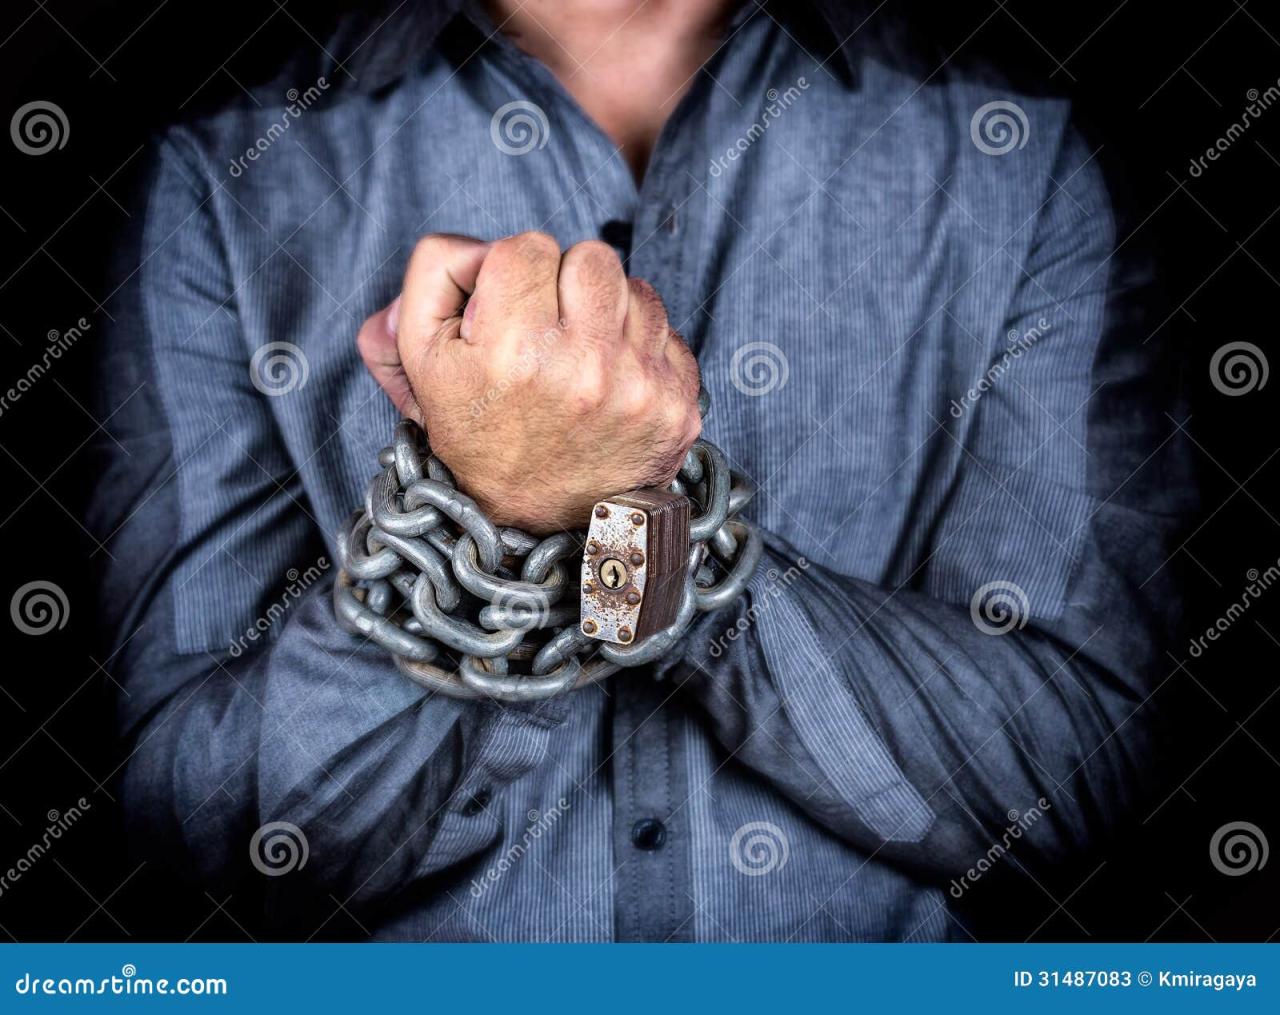 Chained together price